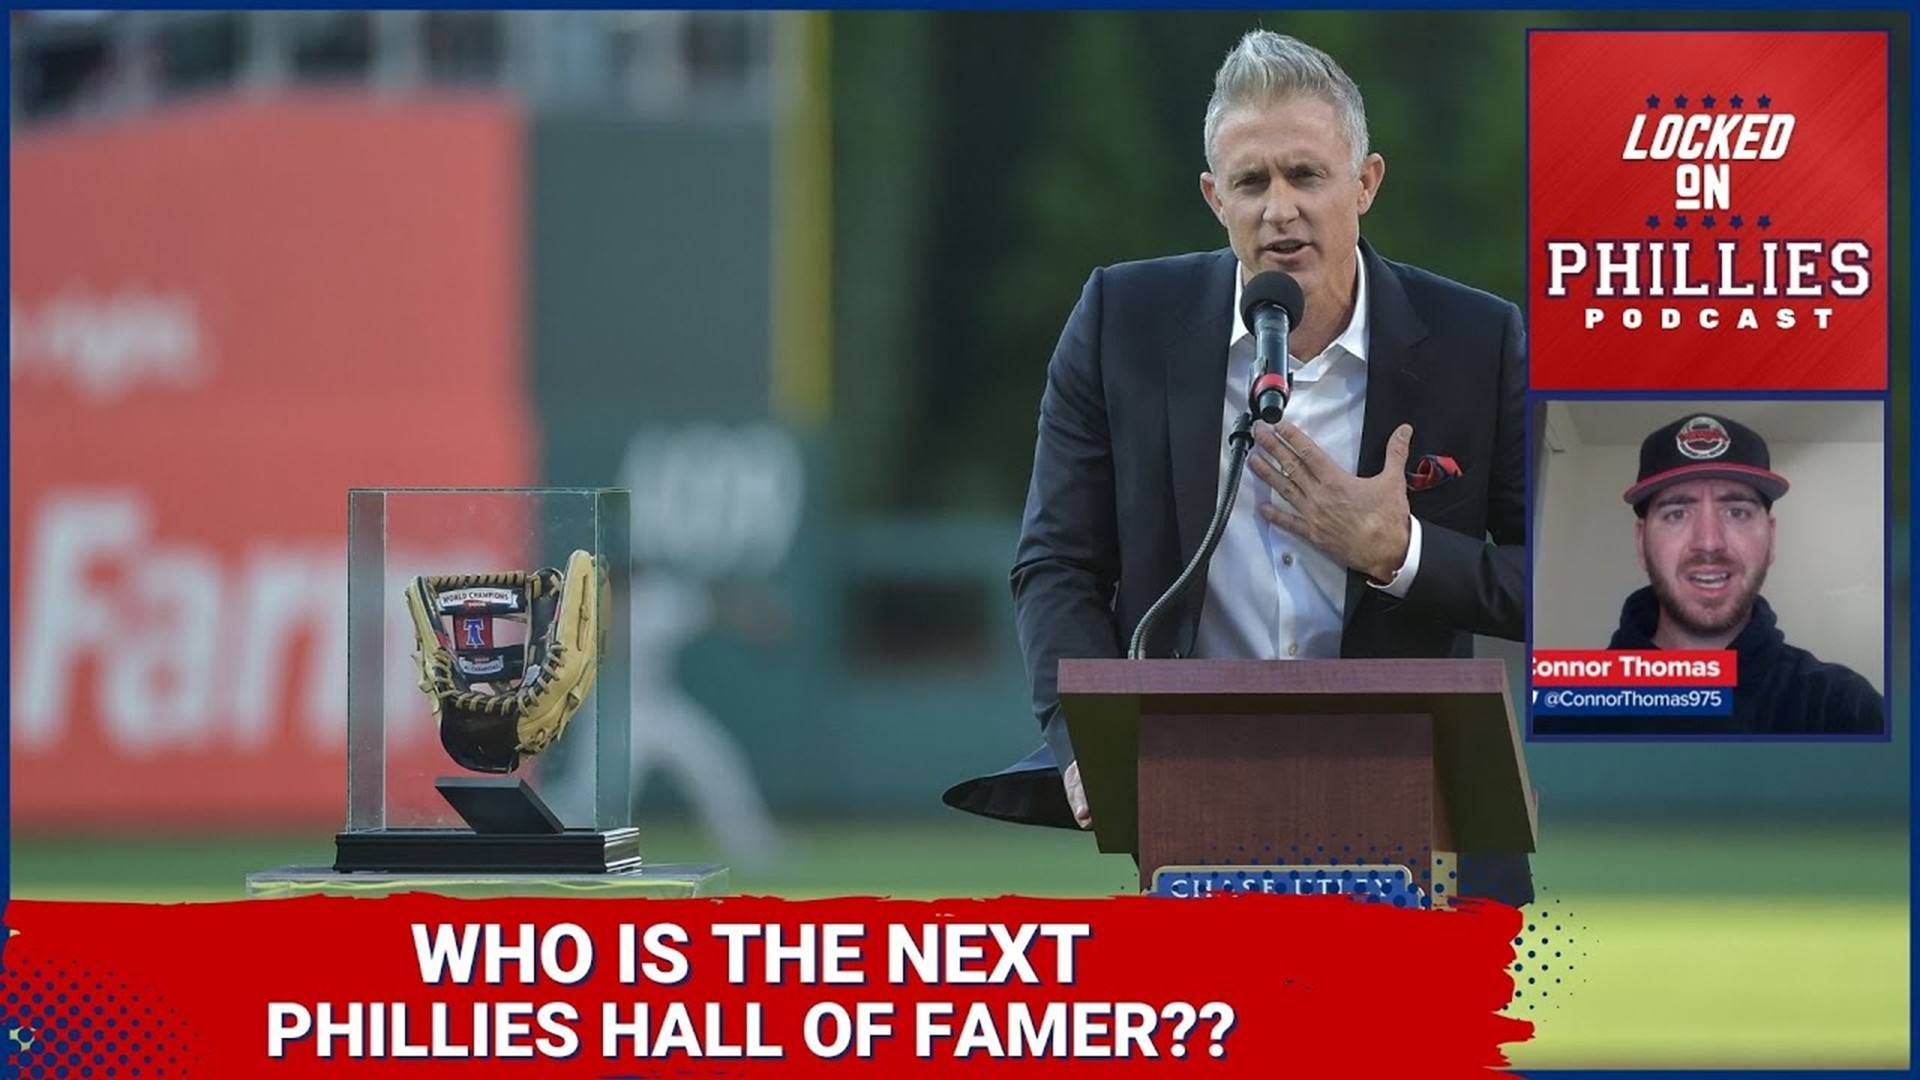 Connor discusses who of the remaining players on the Hall of Fame ballot will be the next Philadelphia Phillie inducted in.